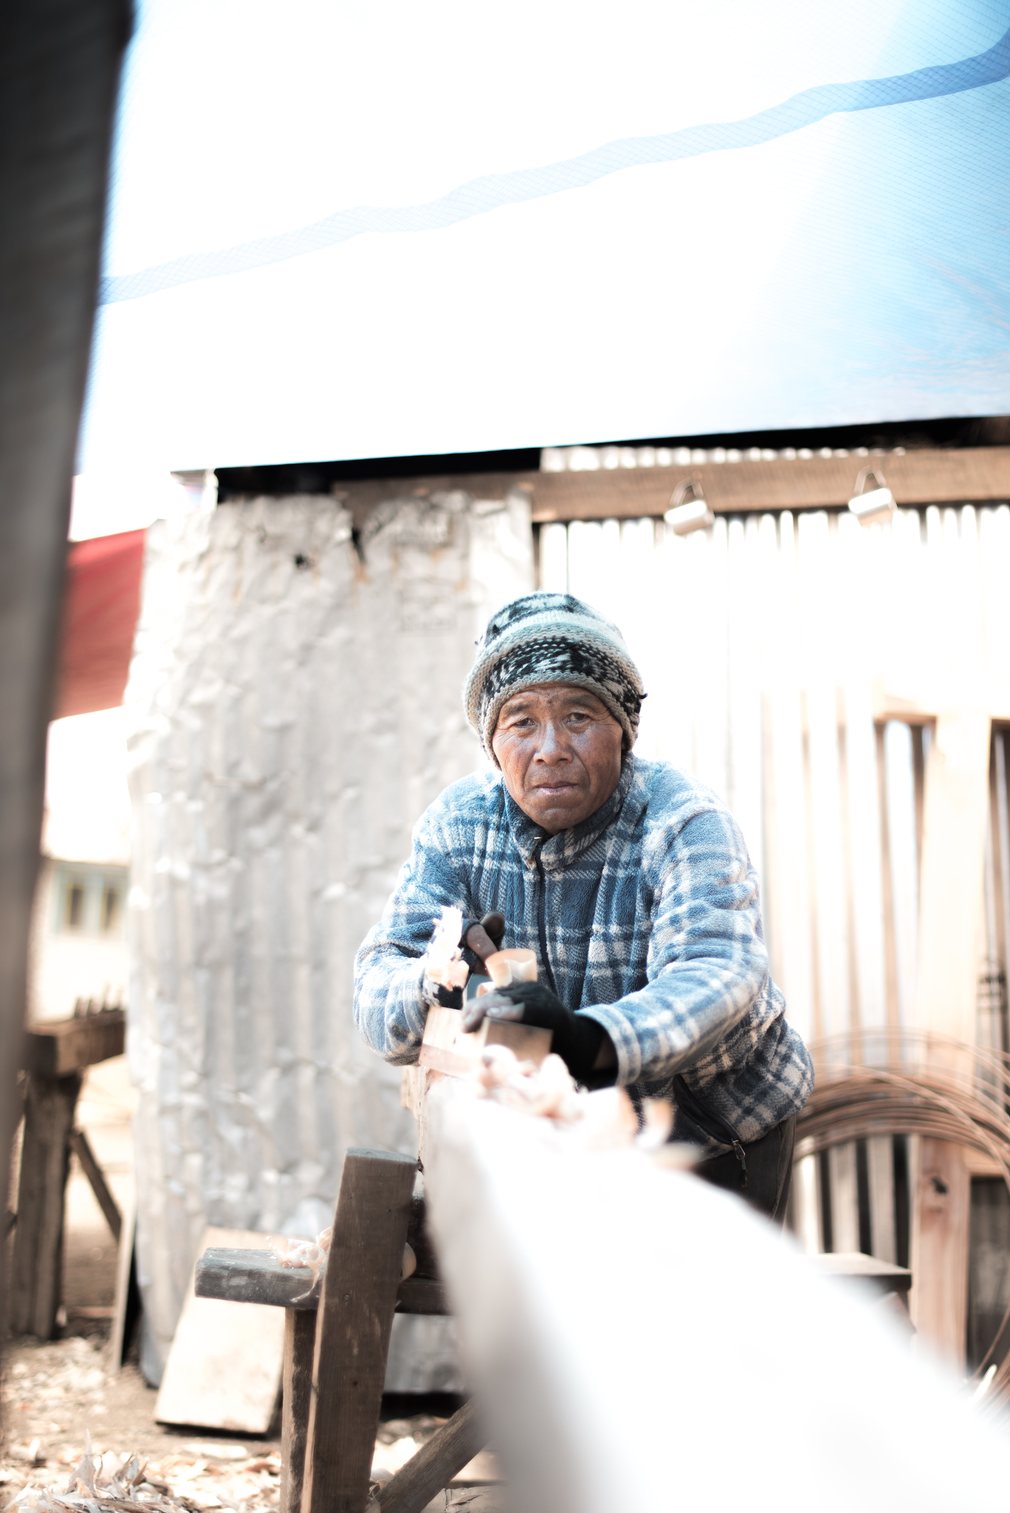 Lobsang, a carpenter who has travelled from Okhaldhunga, planes a wooden beam. He is one of many volunteers from other regions who have come to Langtang to help in reconstruction